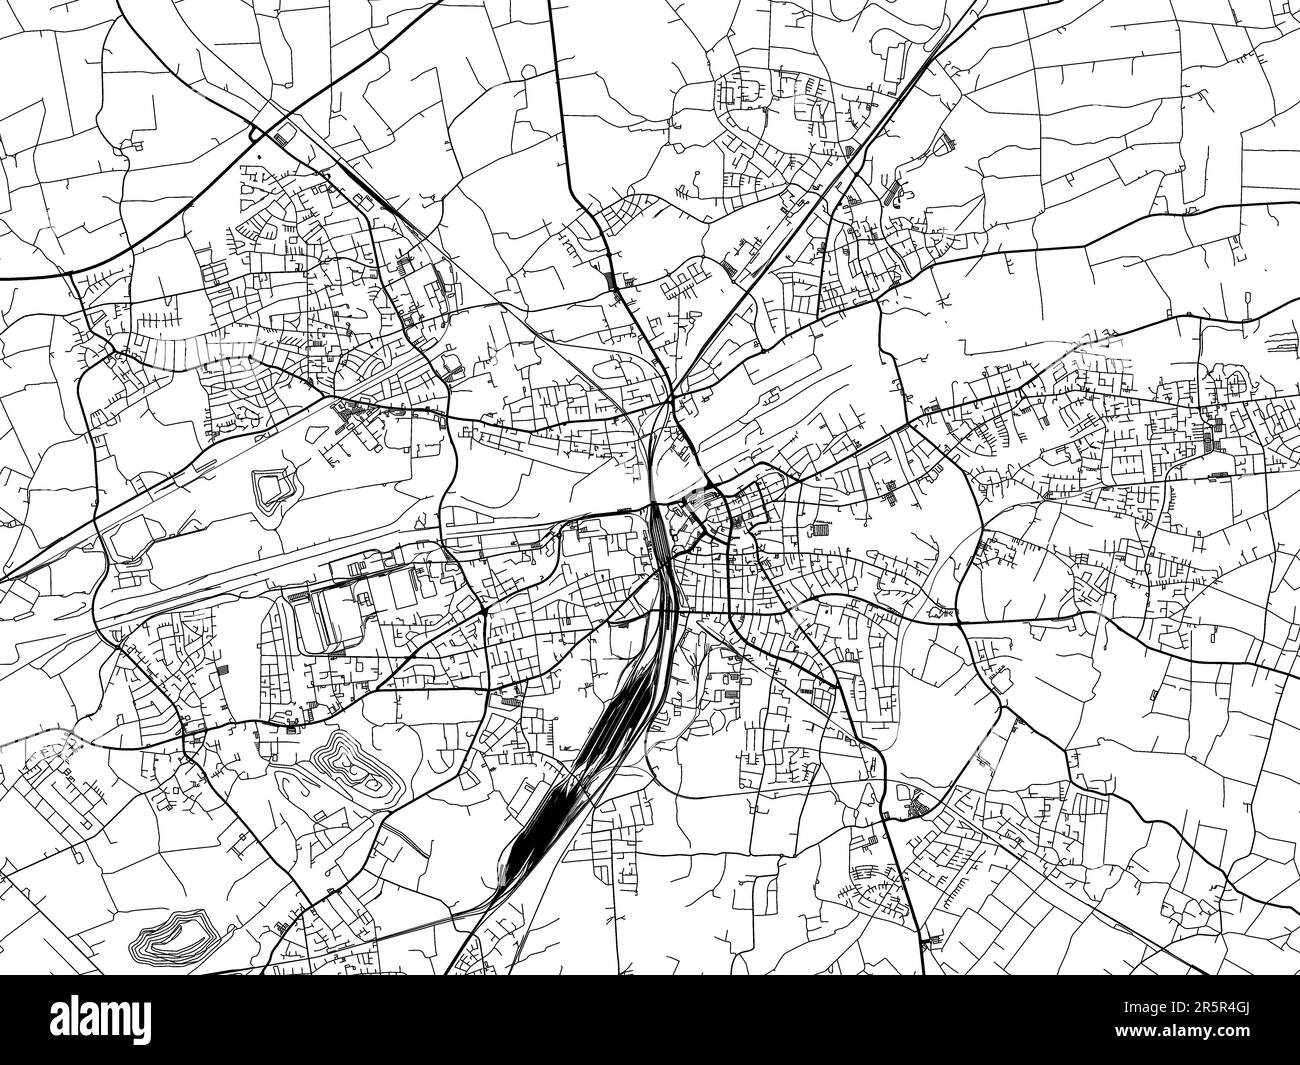 Vector road map of the city of  Hamm in Germany on a white background. Stock Photo